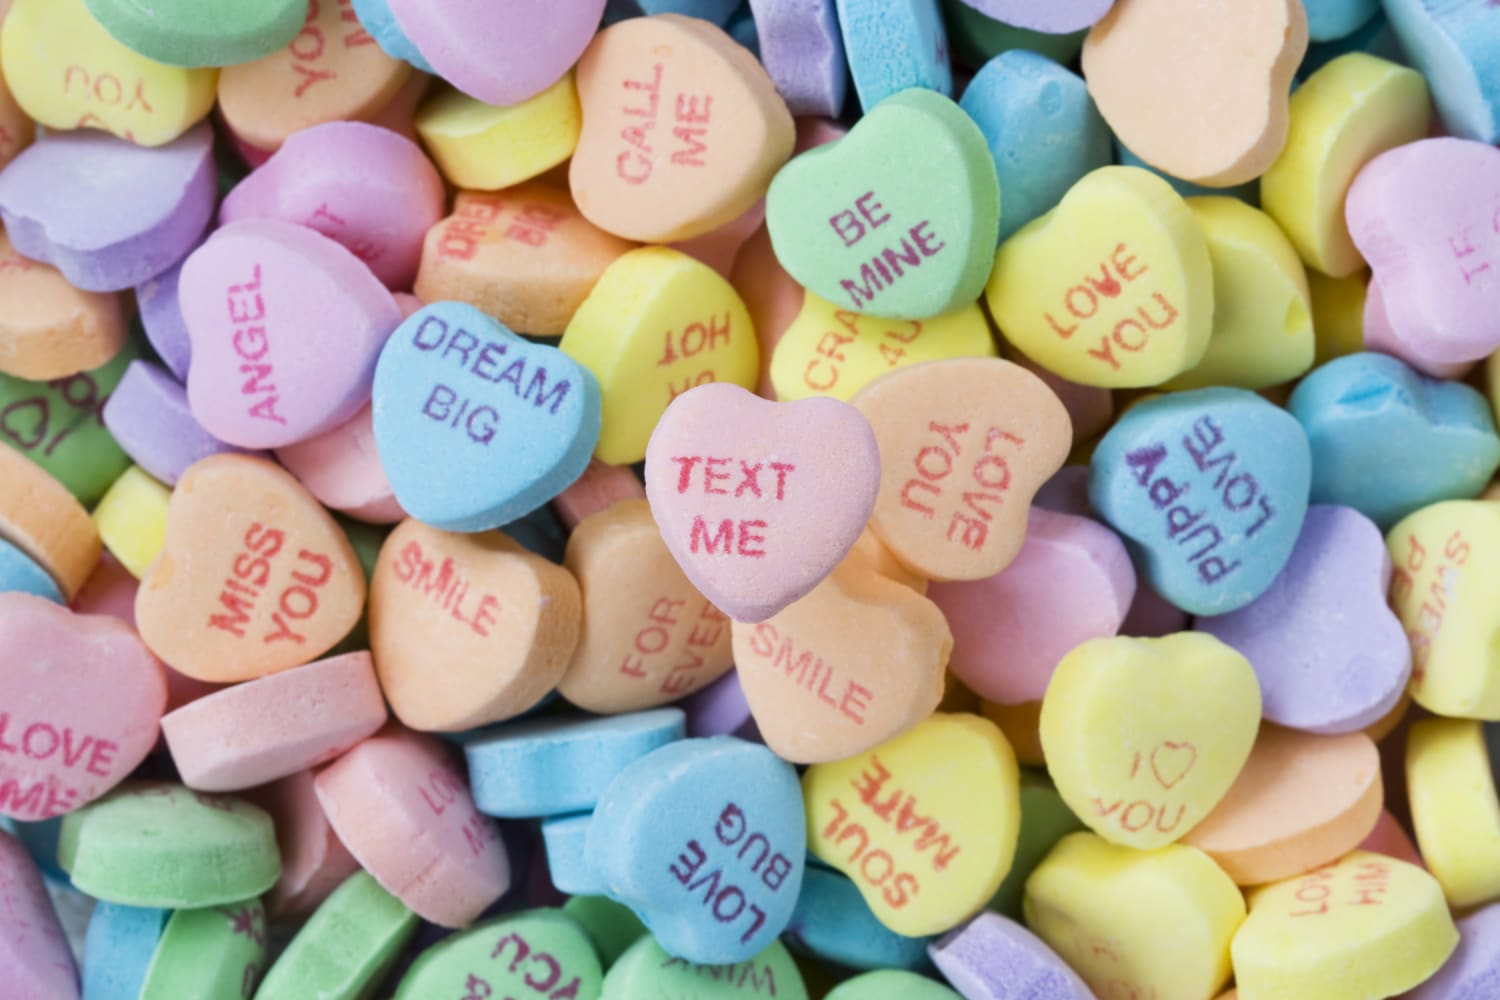 This time I DIDN'T train a neural net to generate candy hearts - AI  WeirdnessCommentShareCommentShare